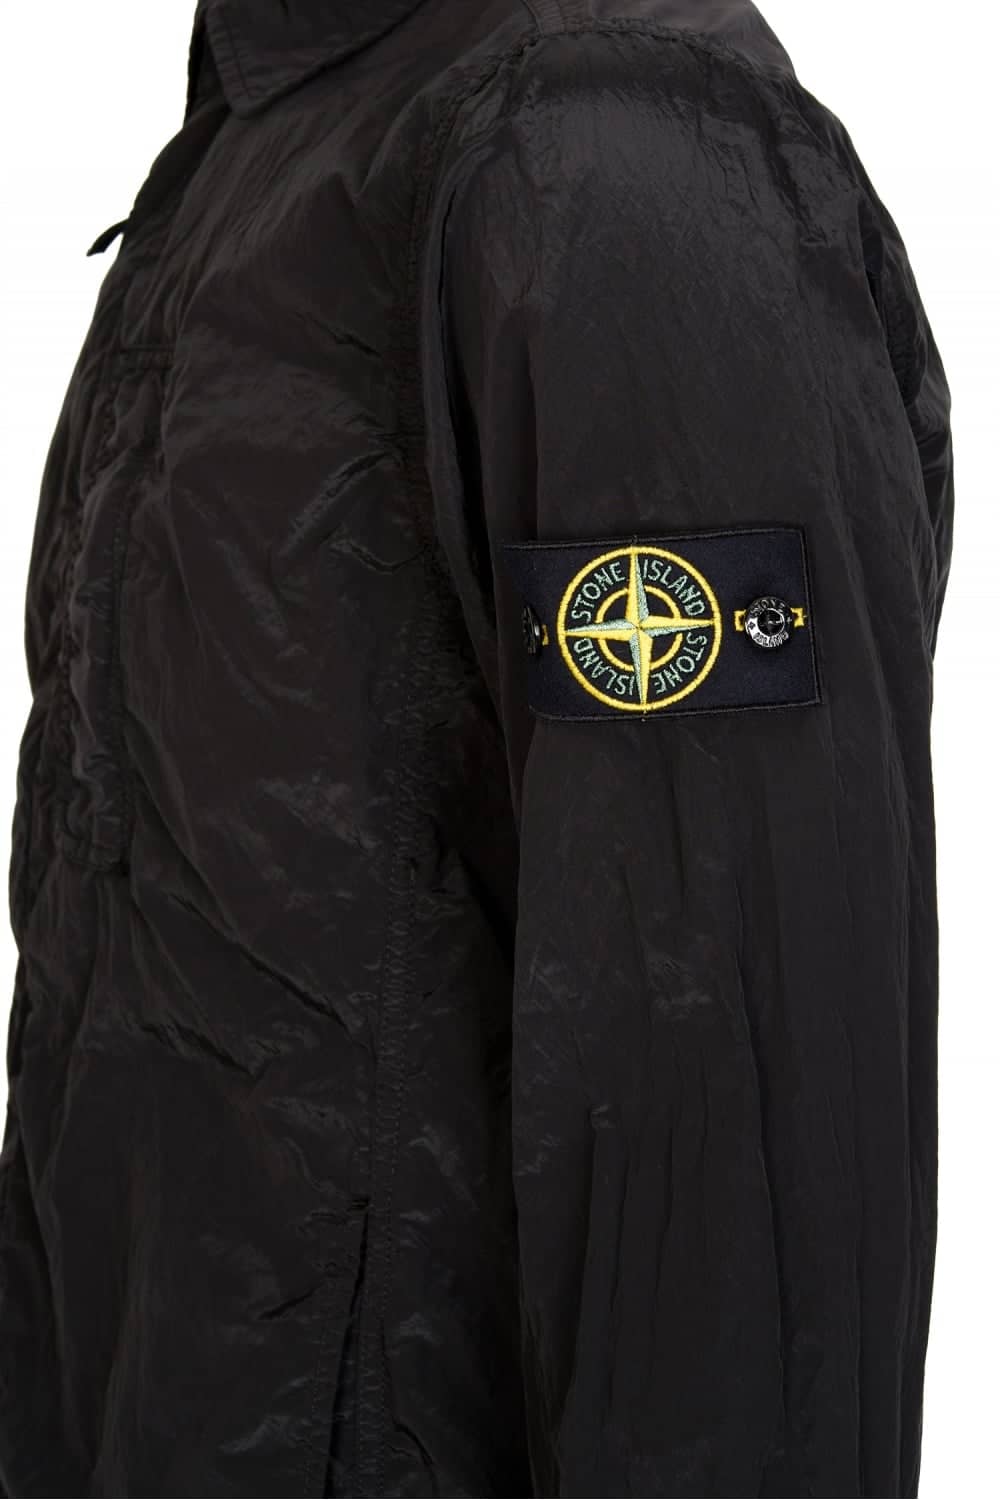 The Influence of Stone Island Badges on Other Fashion Brands: A Badge Worth Copying?